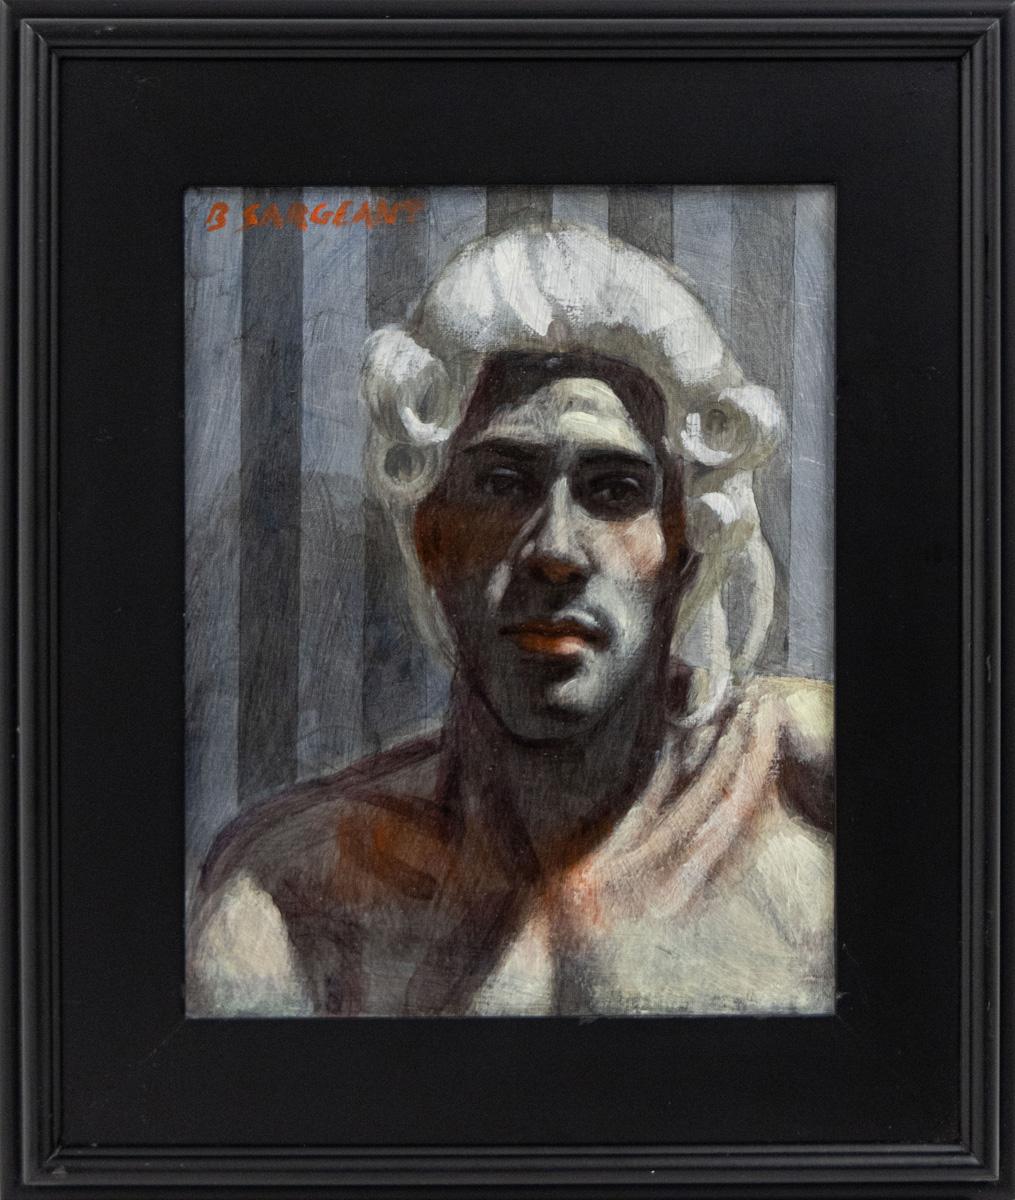 [Bruce Sargeant (1898-1938)] Portrait in a Powdered Wig - Painting by Mark Beard